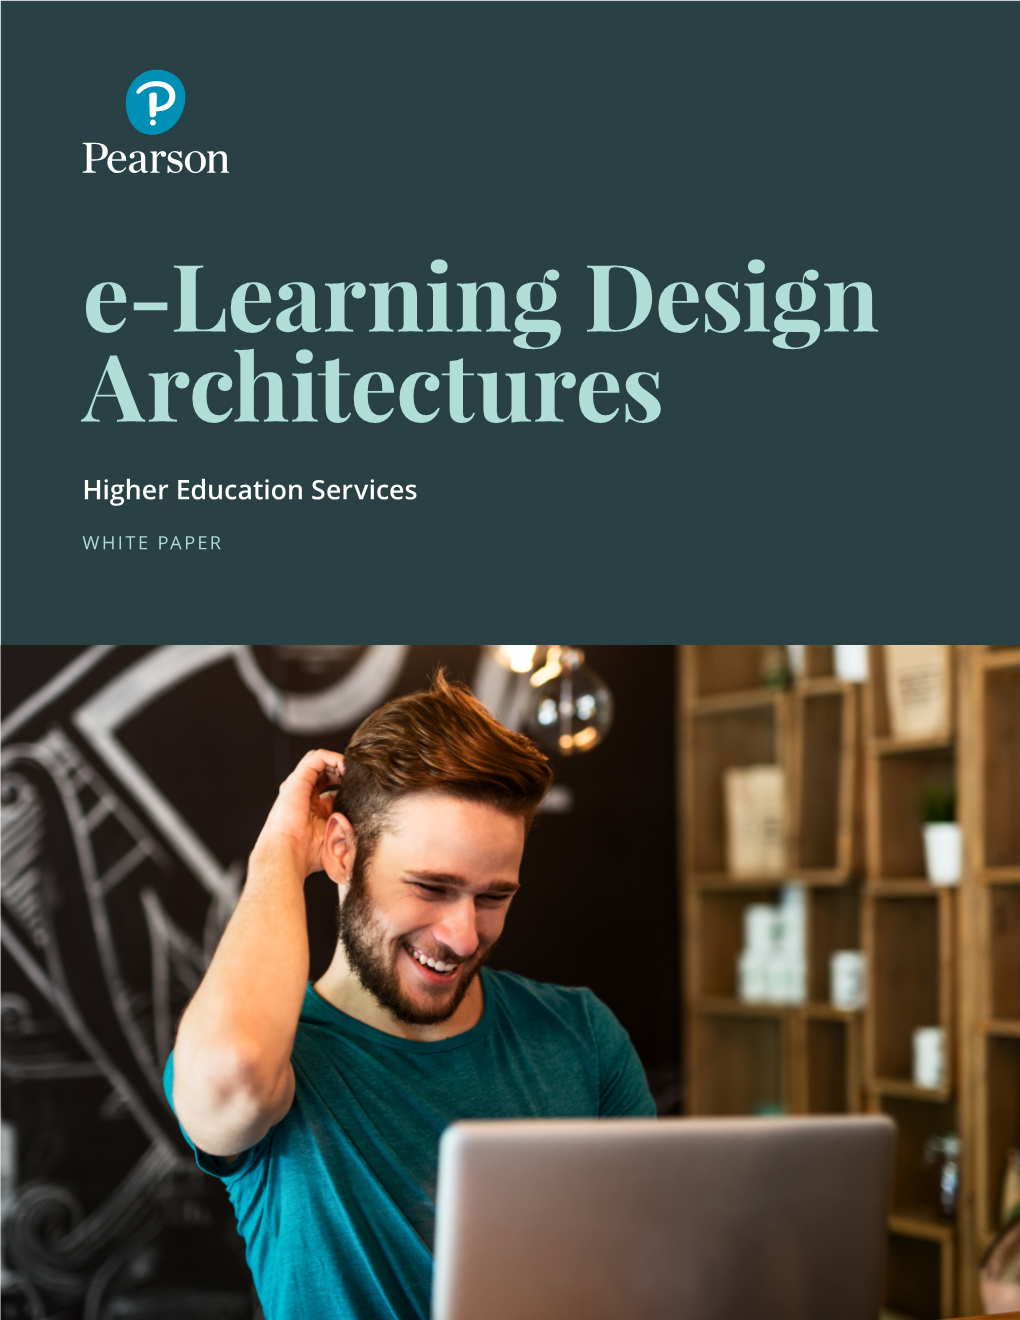 E-Learning Design Architectures